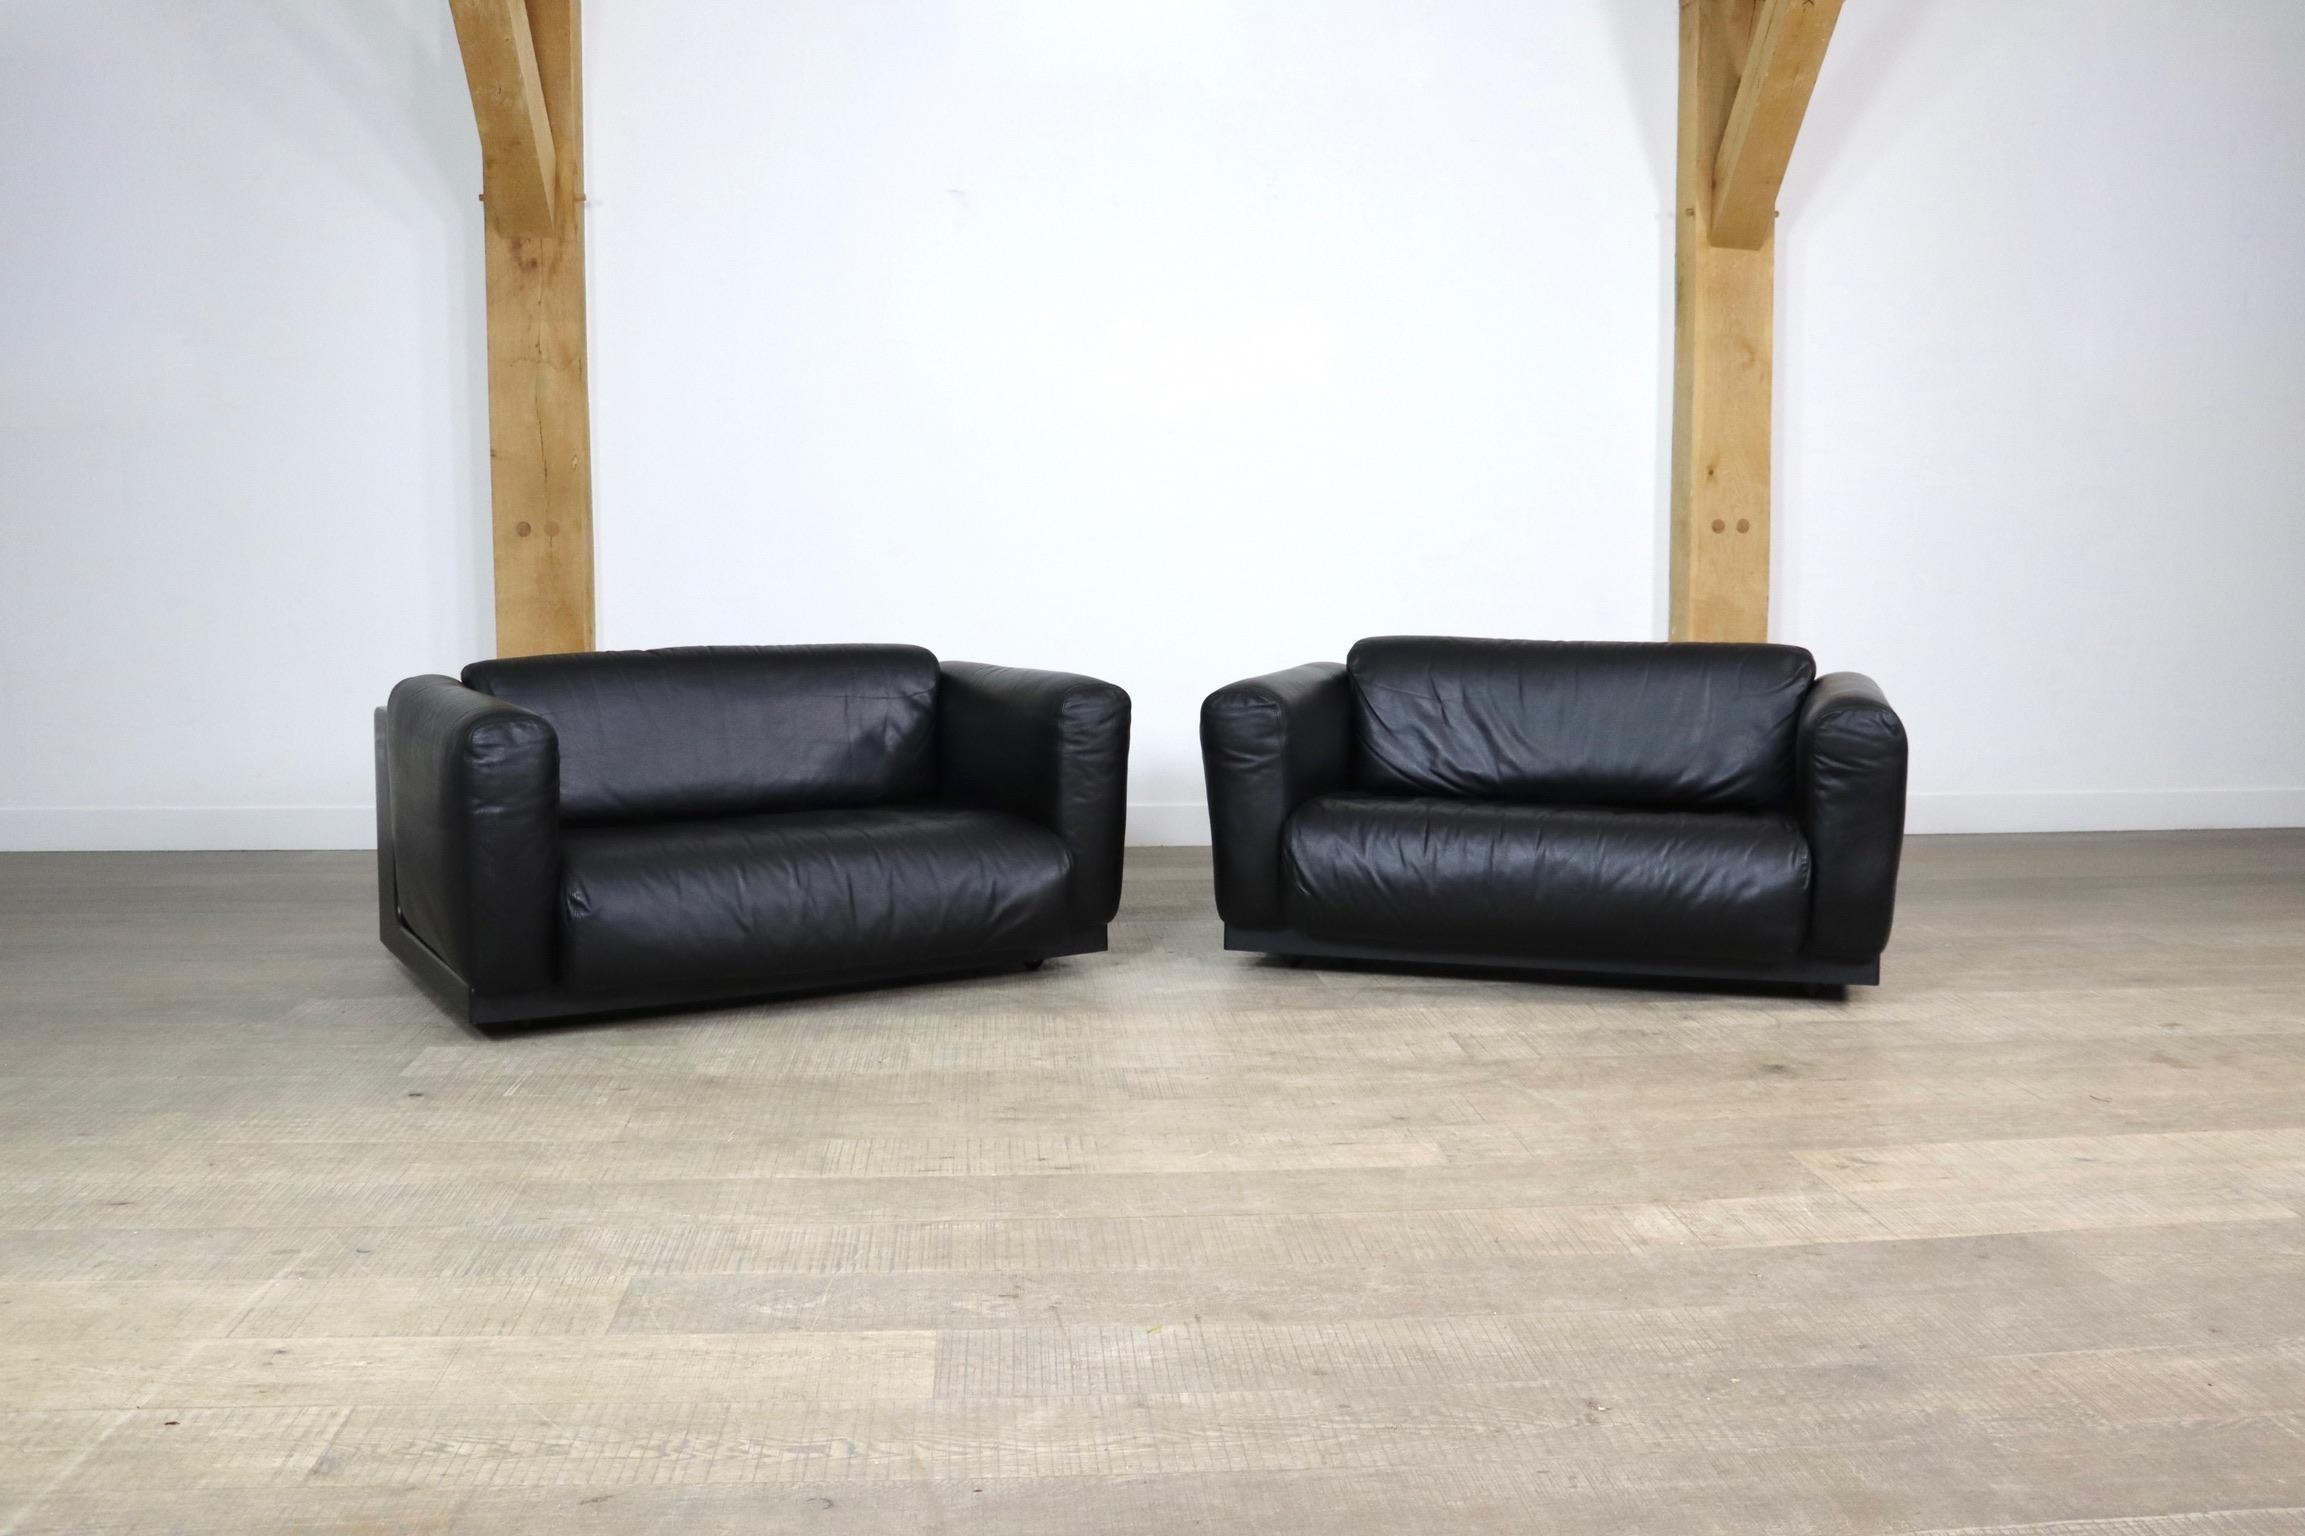 Amazing pair of Gradual sofas/ loveseats in black leather by Cini Boeri for Knoll, Italy 1970s. This sophisticated, yet practical design will be the perfect addition to your modern interior. The storage space in the back is the ideal combination to